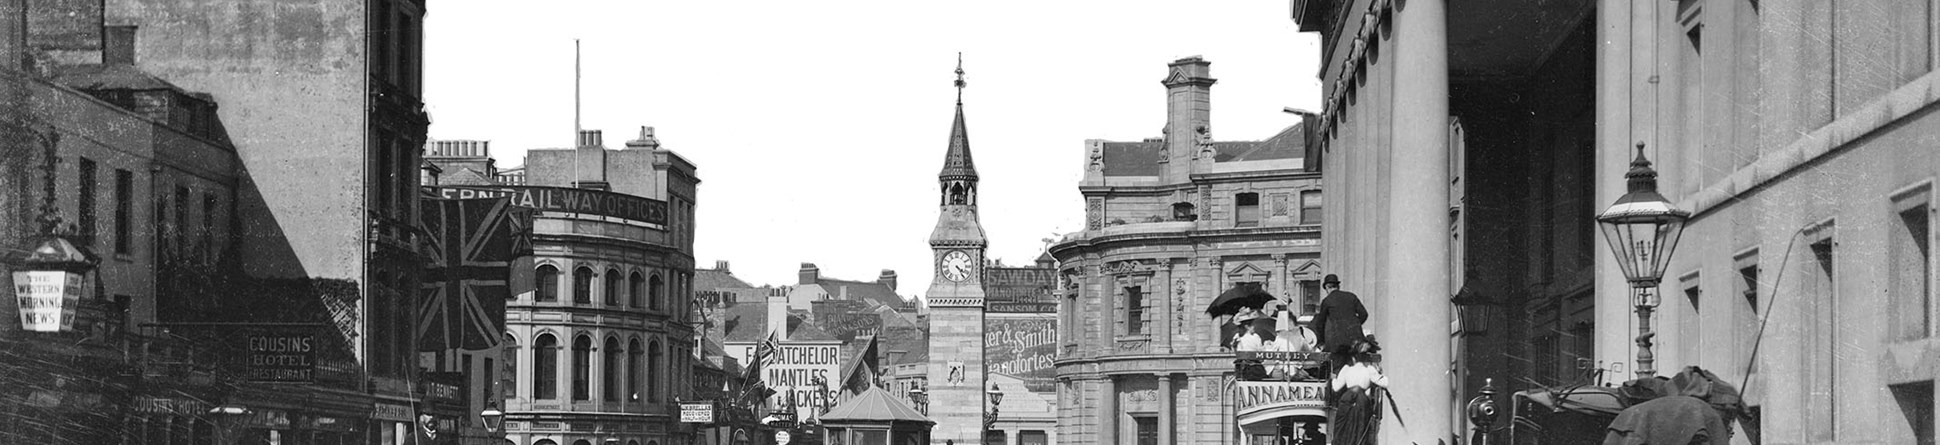 Black and white archive photograph of a busy street scene.